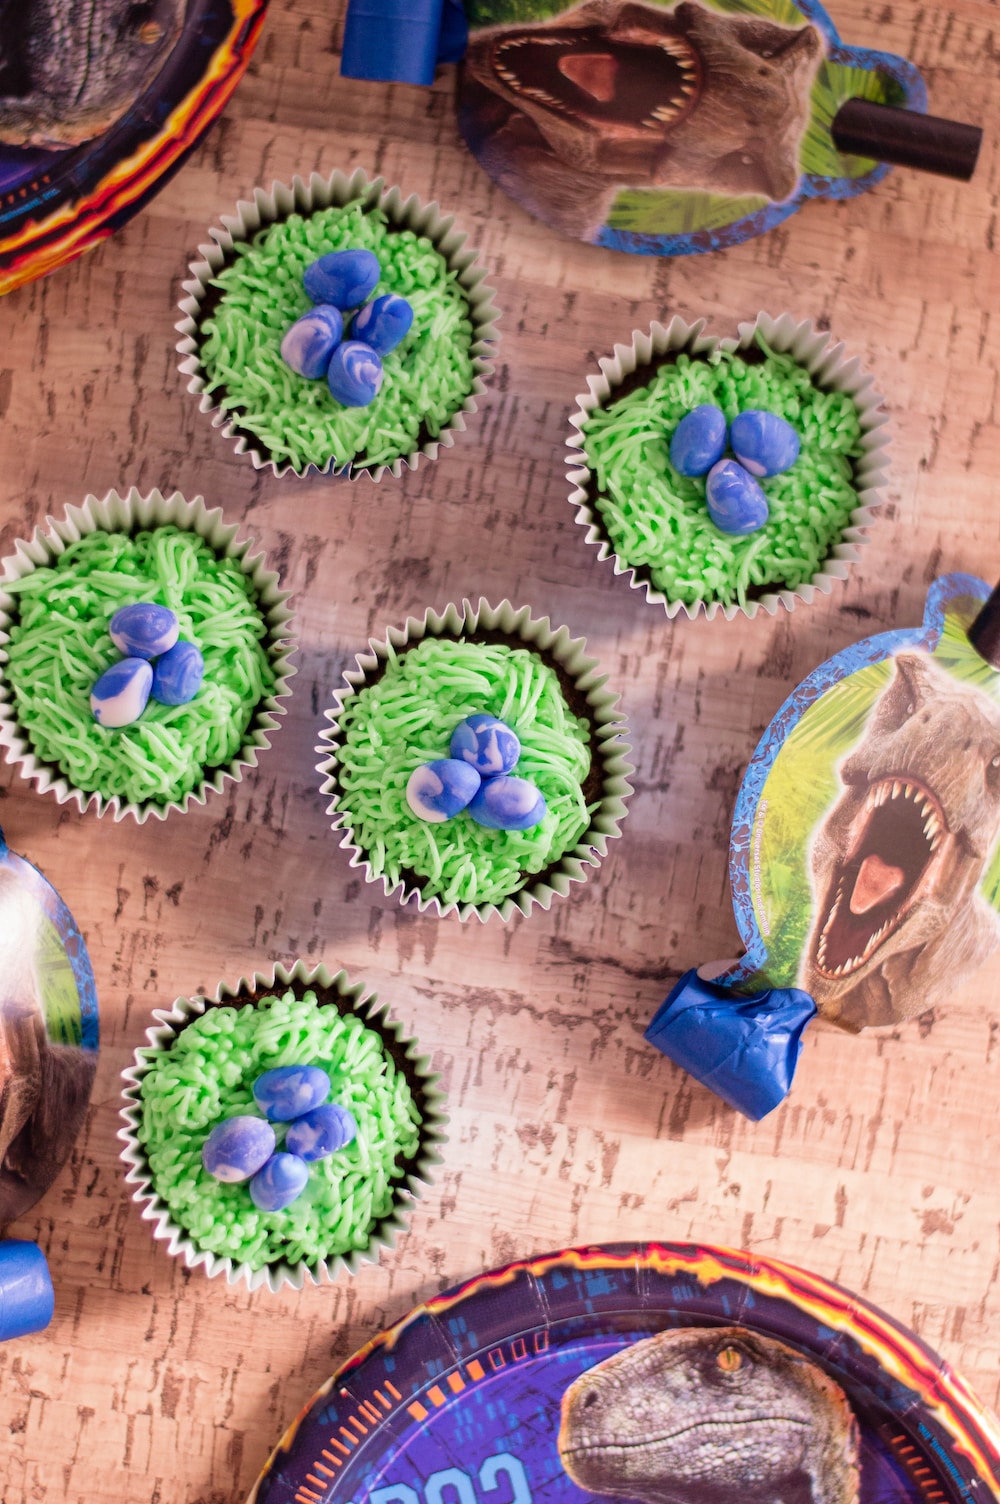 Looking for a dinomite addition to your next dinosaur party? You can't miss these deliciously easy dinosaur cupcakes with eggs!